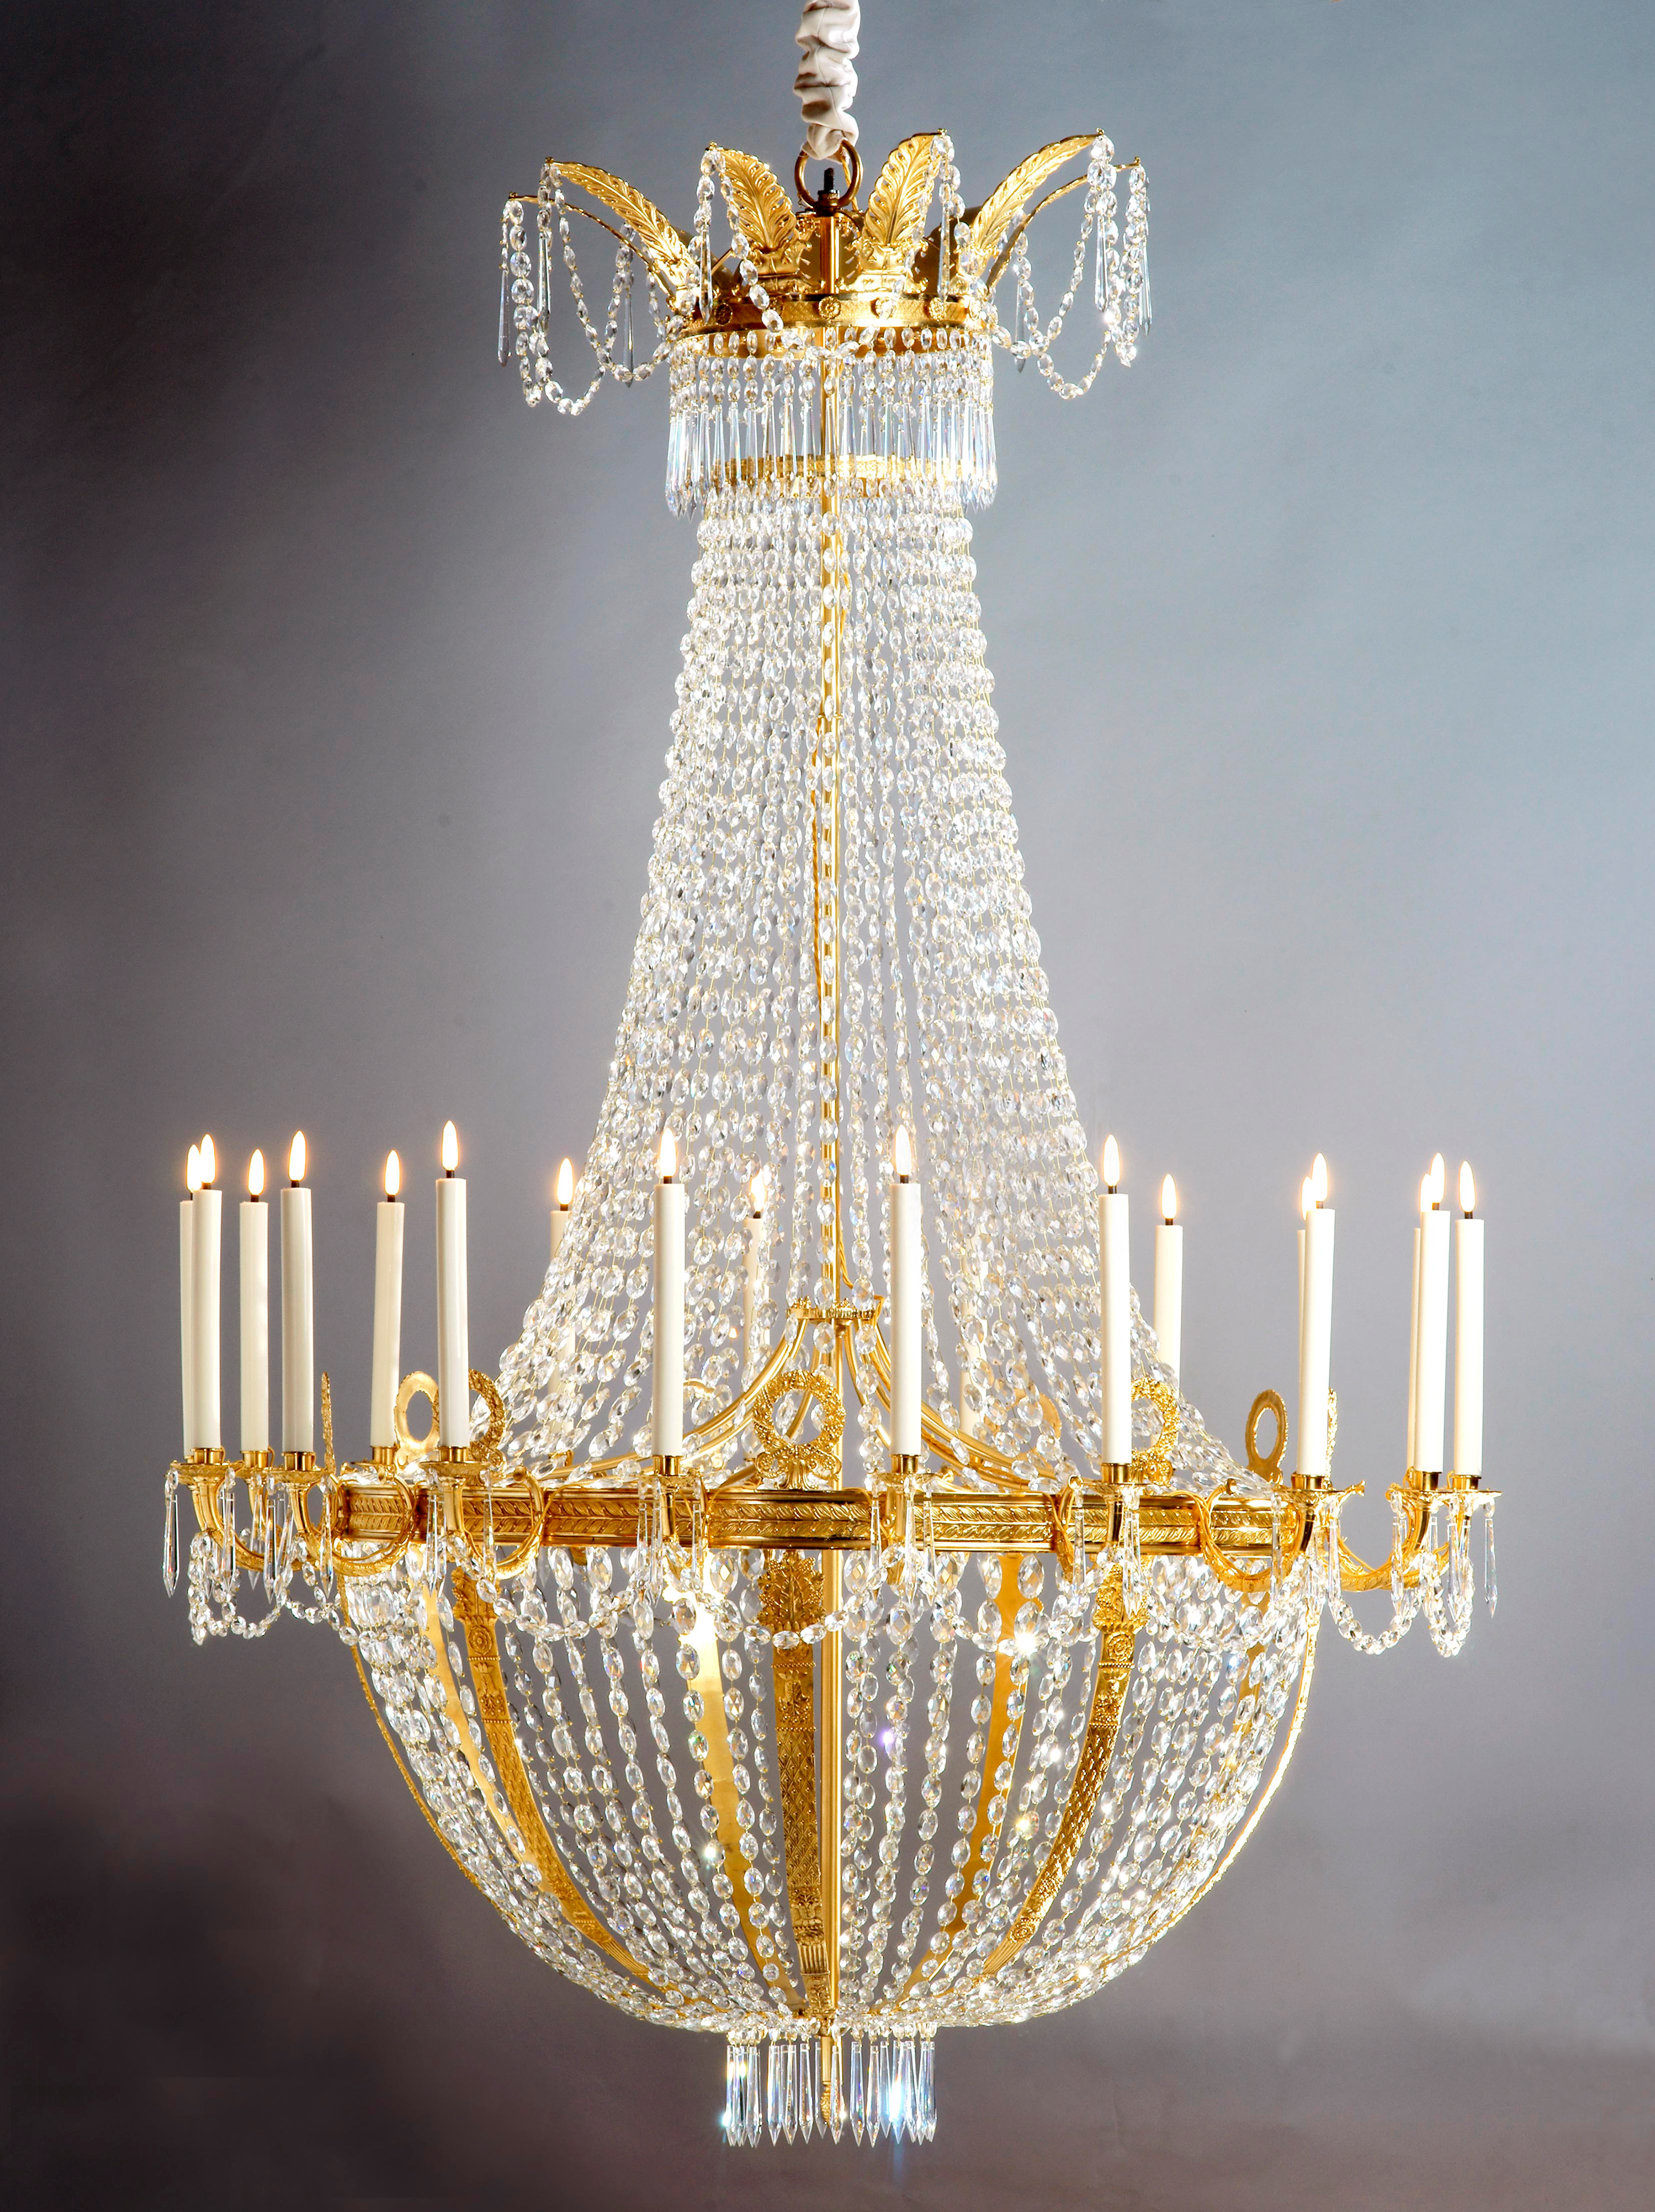 Empire “Corbeille” Chandelier with 18 arms